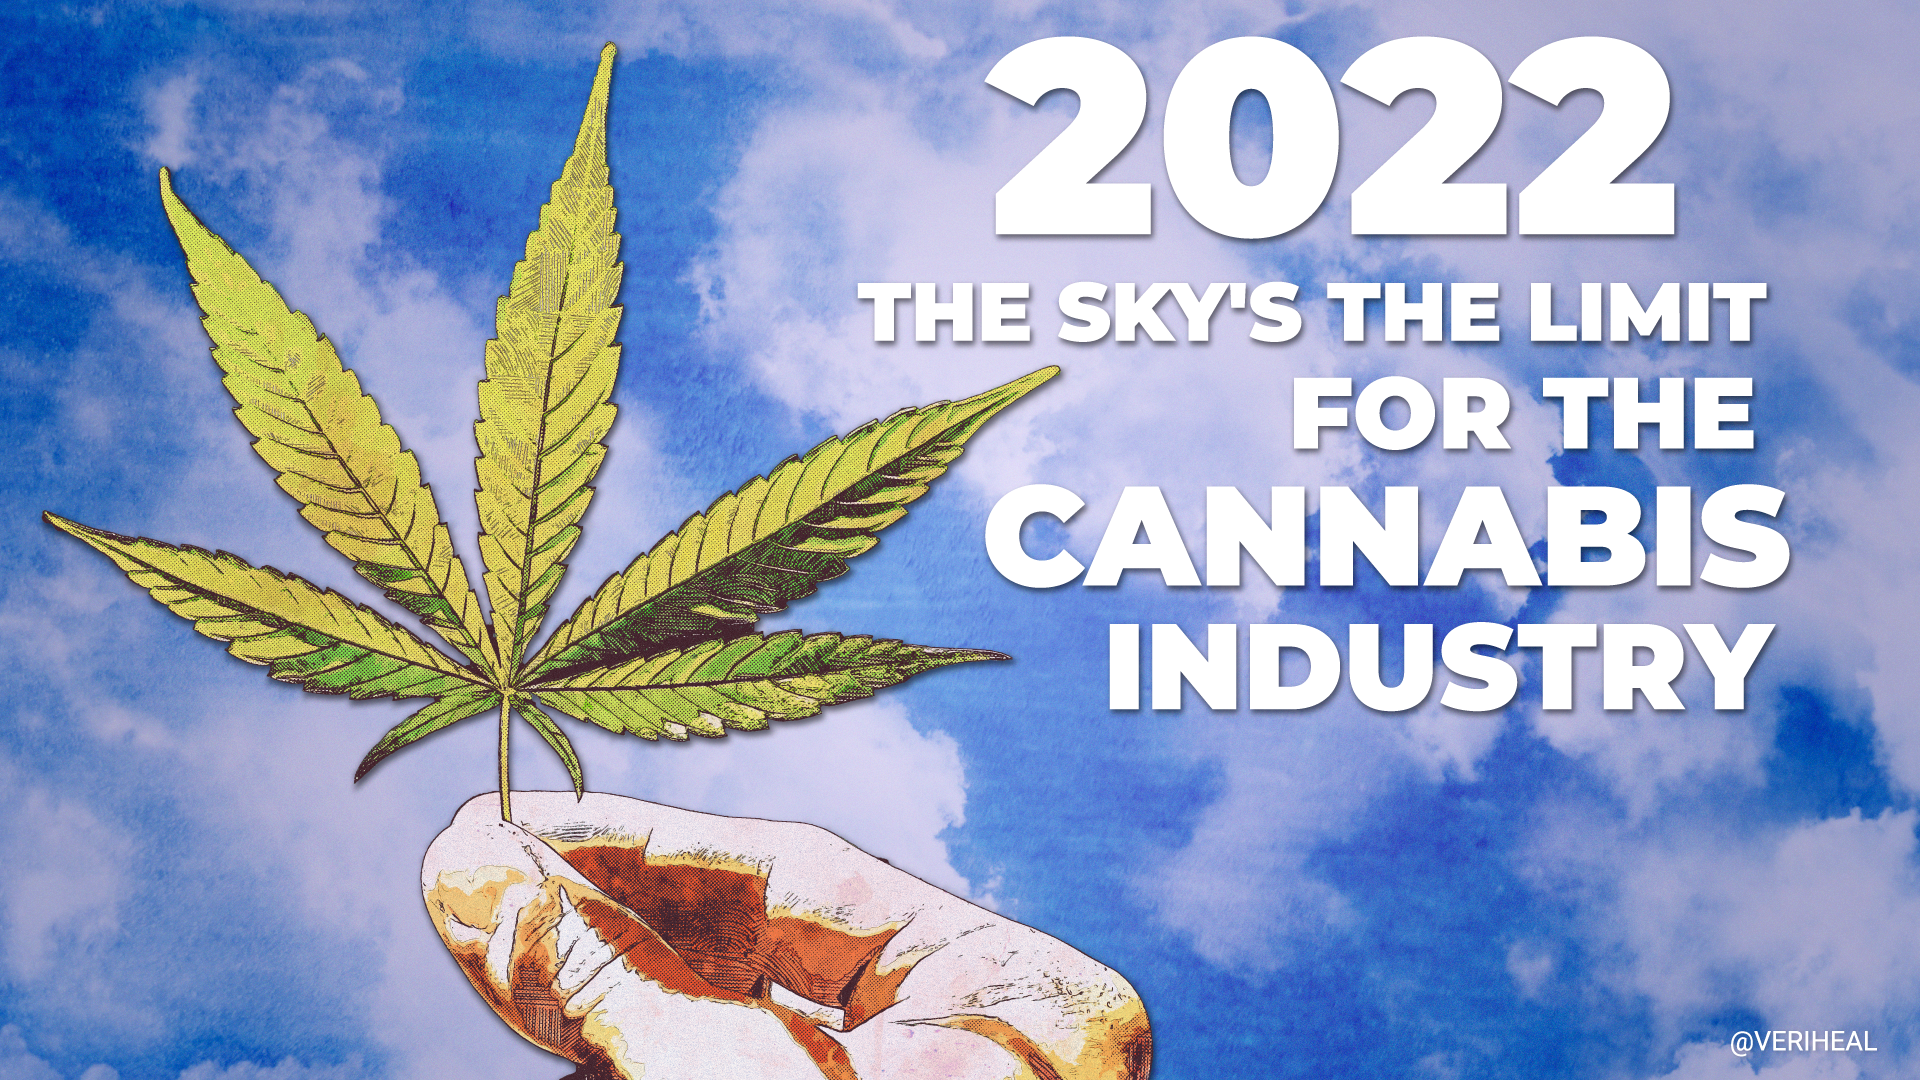 The Sky’s the Limit for the Cannabis Industry in 2022